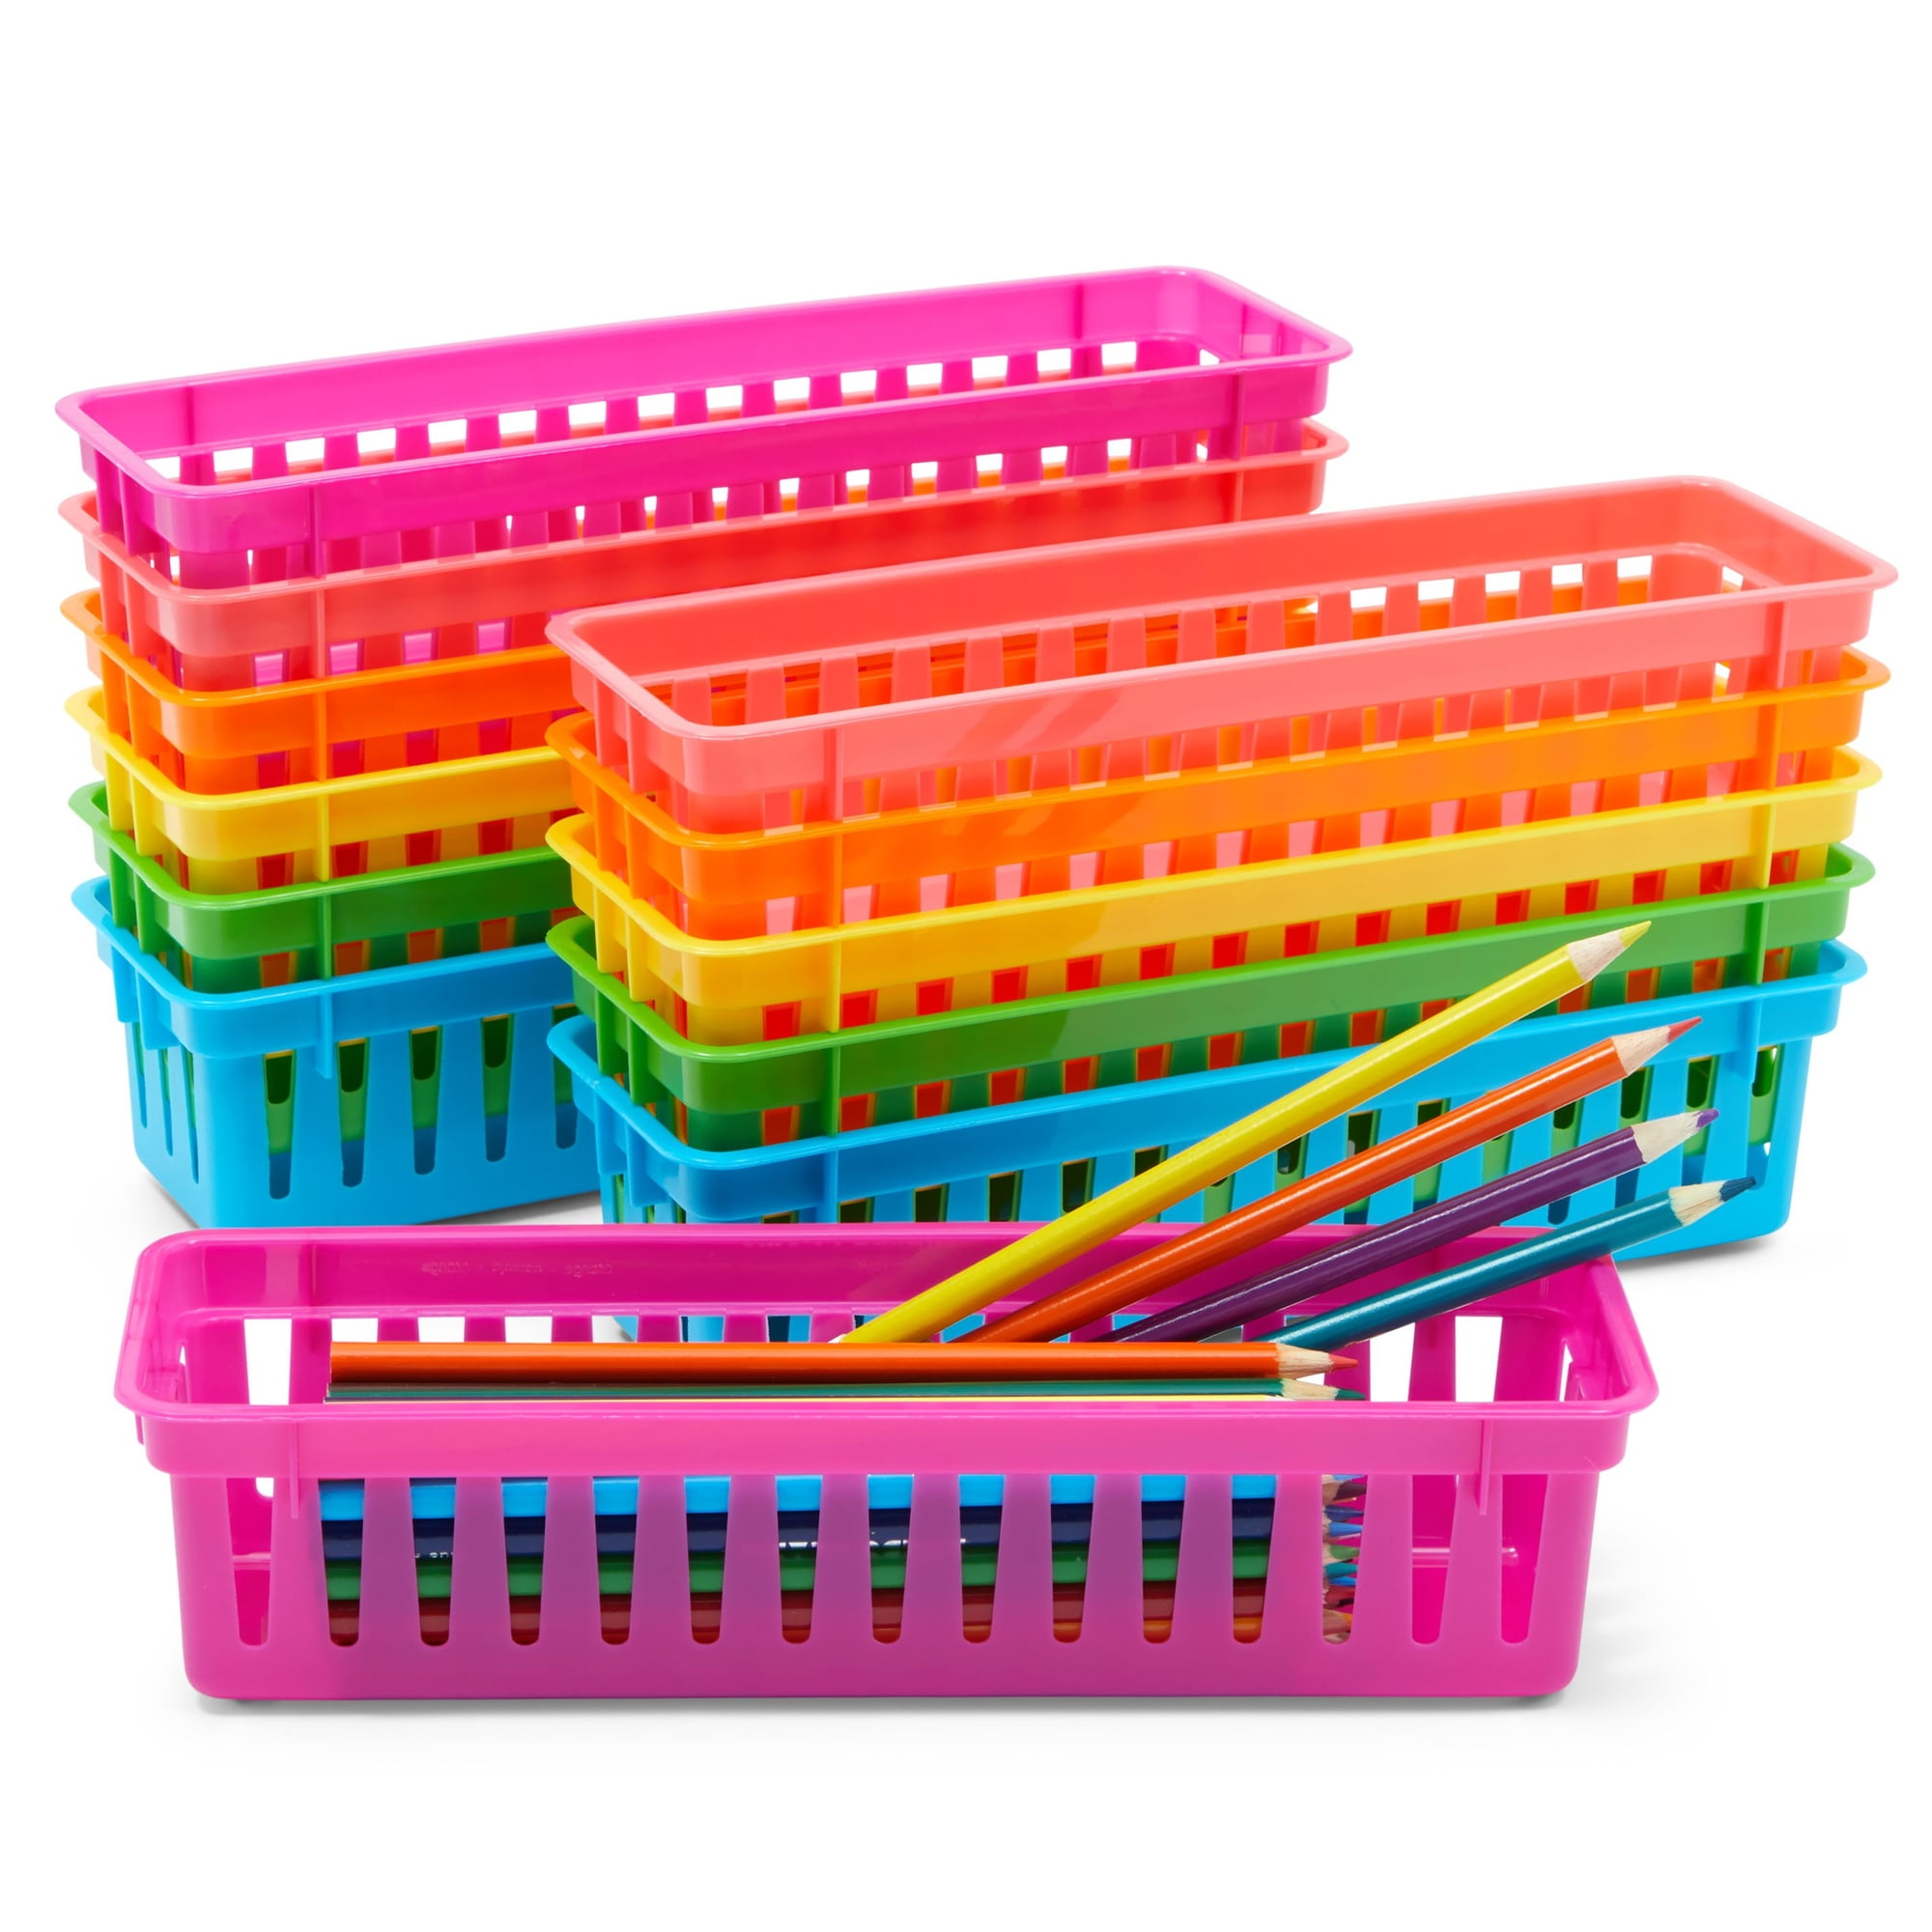 Classroom Paper Baskets - Set of 12 - Black by Really Good Stuff